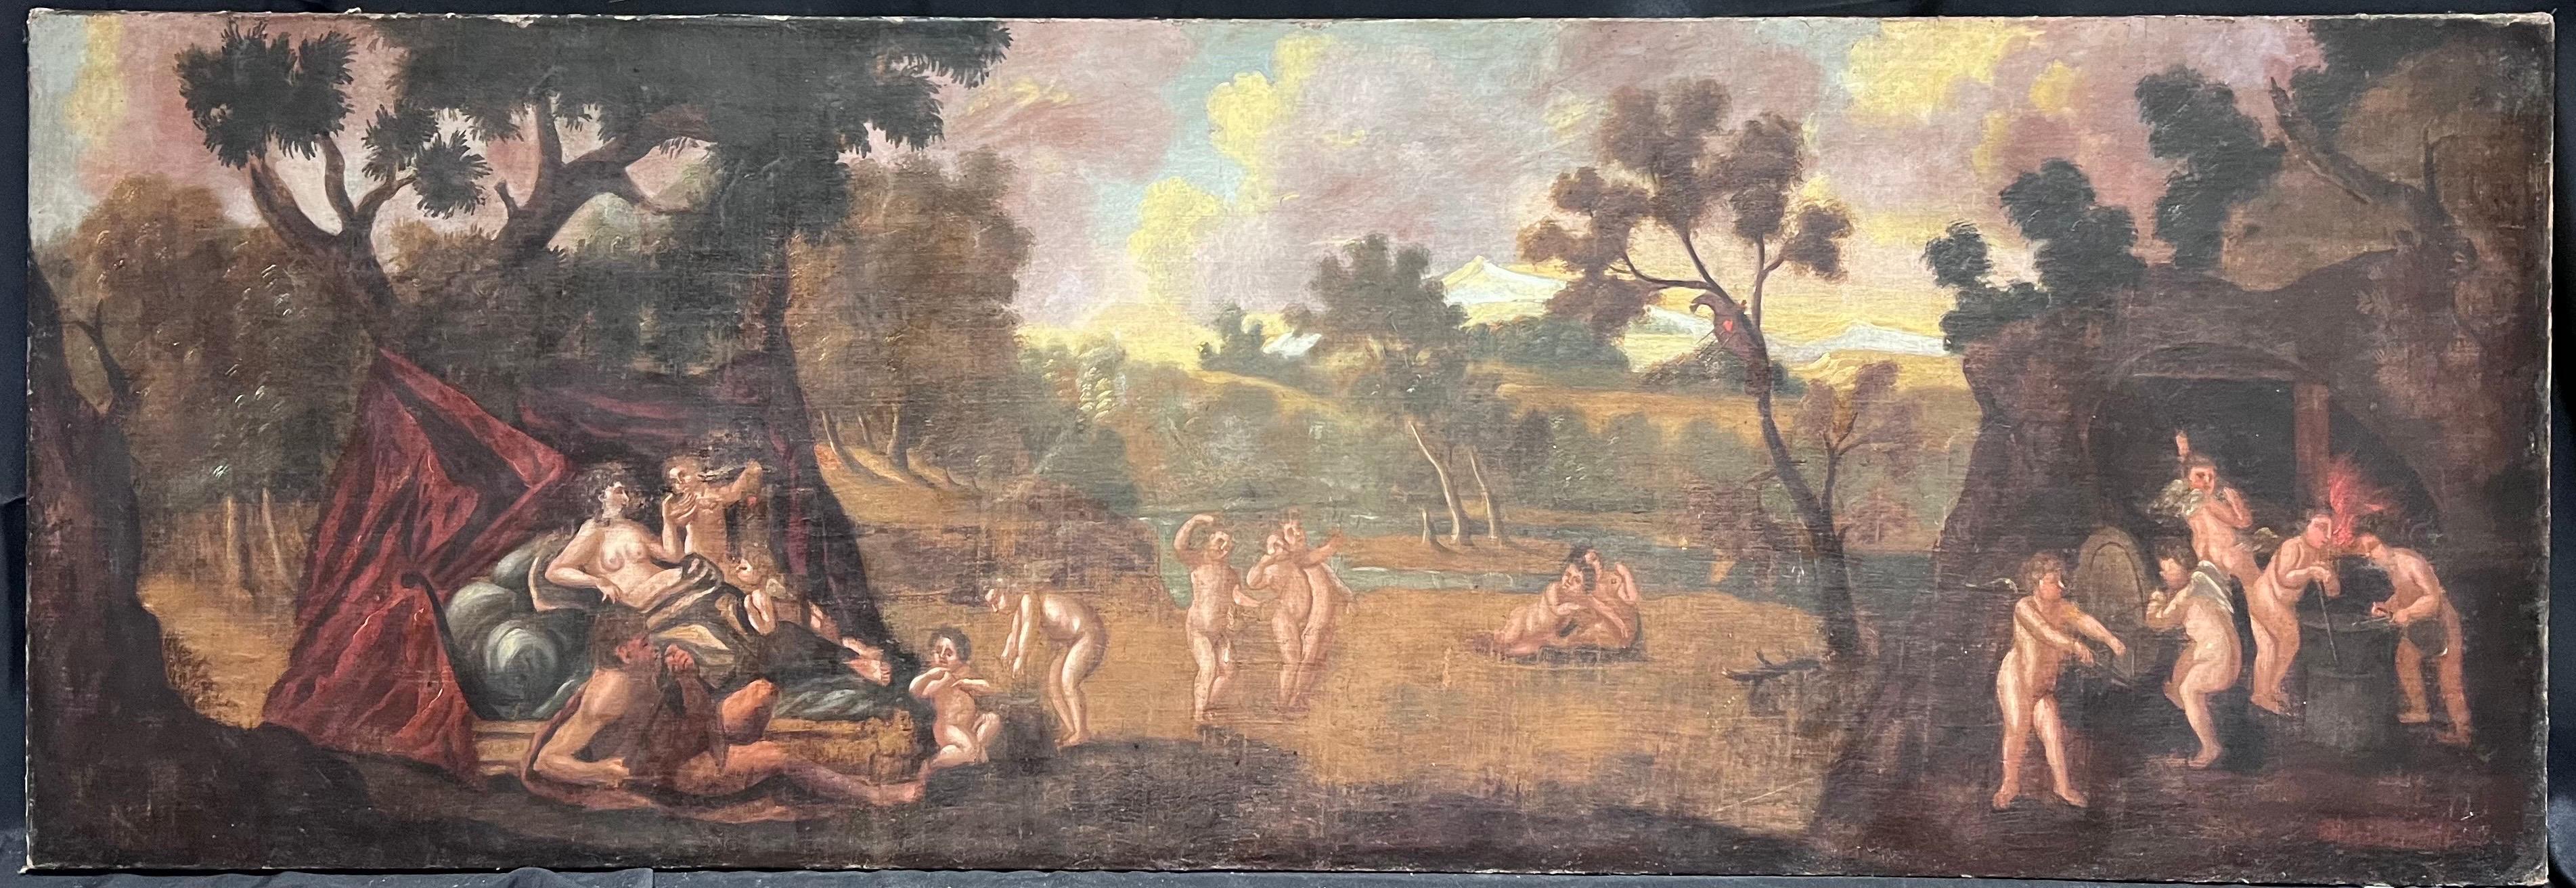 Huge Old Master Oil Painting 17th century Diana & Cupids in Panoramic Landscape - Gray Figurative Painting by Northern European 17th Century